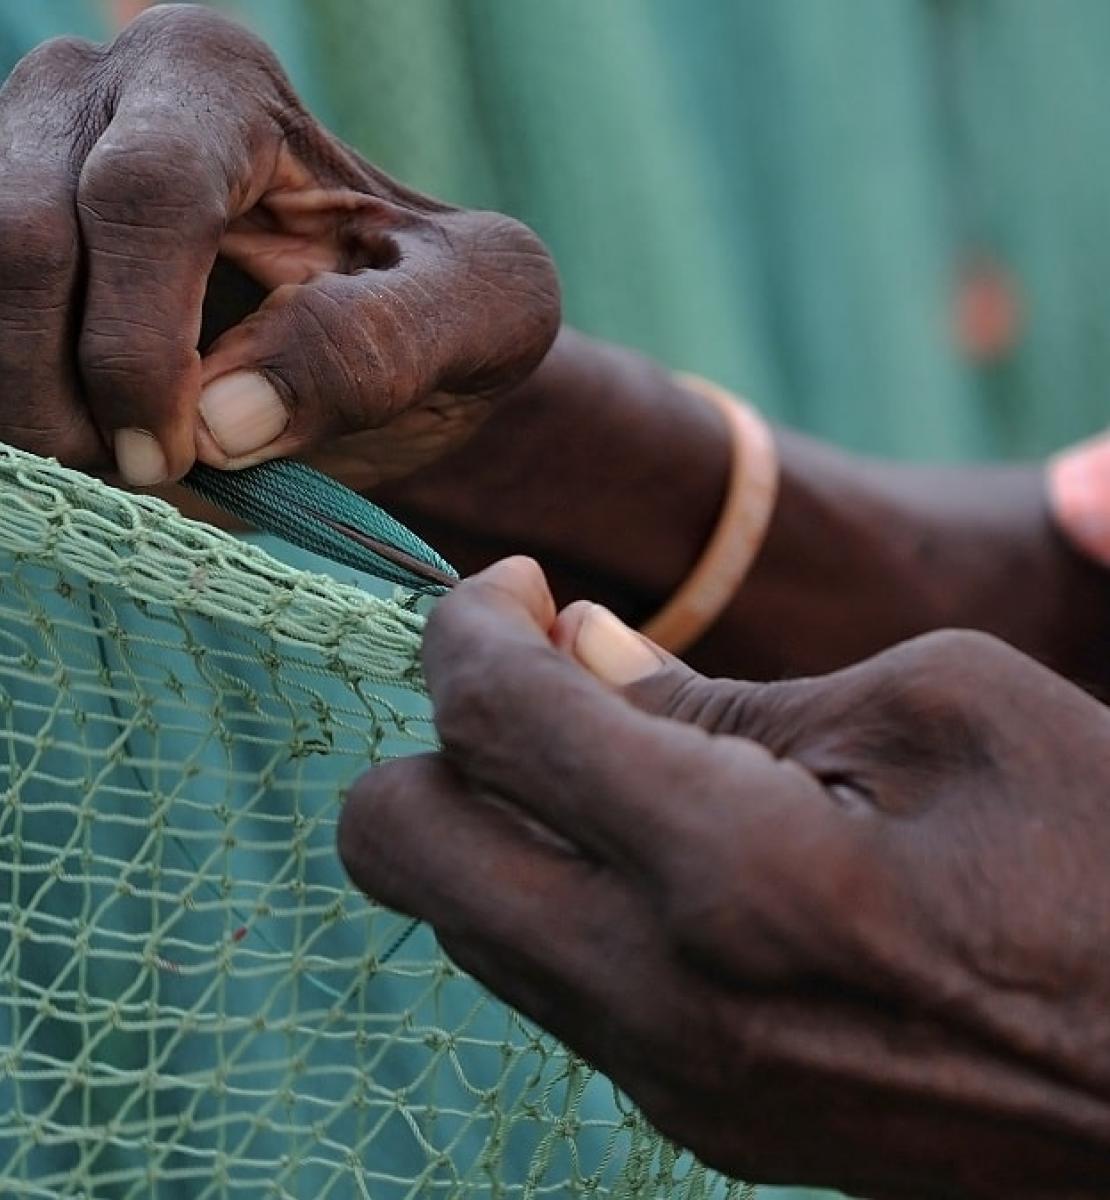 A close-up photo of a woman's hands weaving a fisher's net.